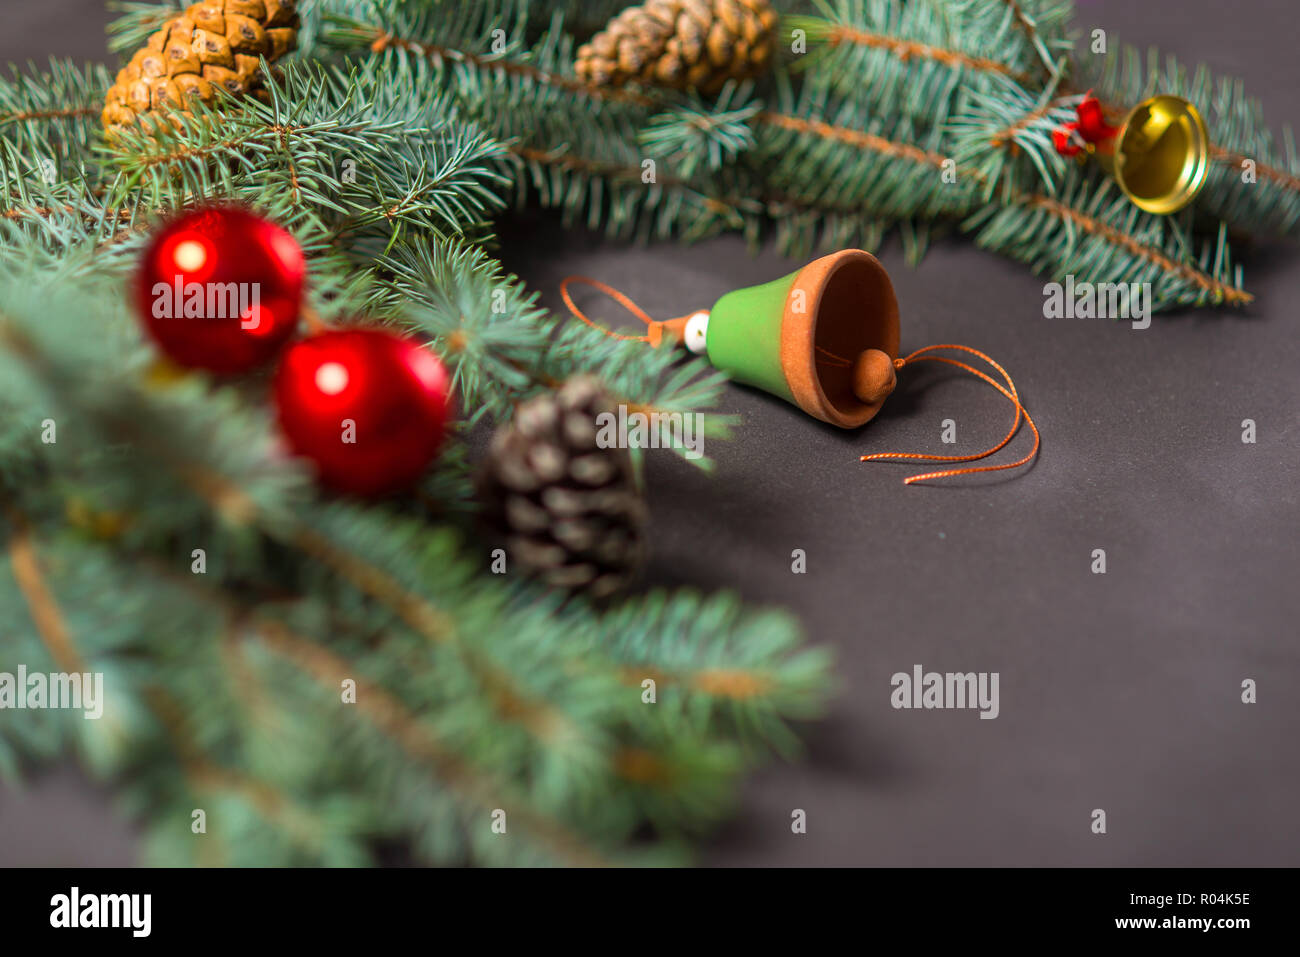 Winter fir and christmas tree with ceramic bell and red globes Stock Photo